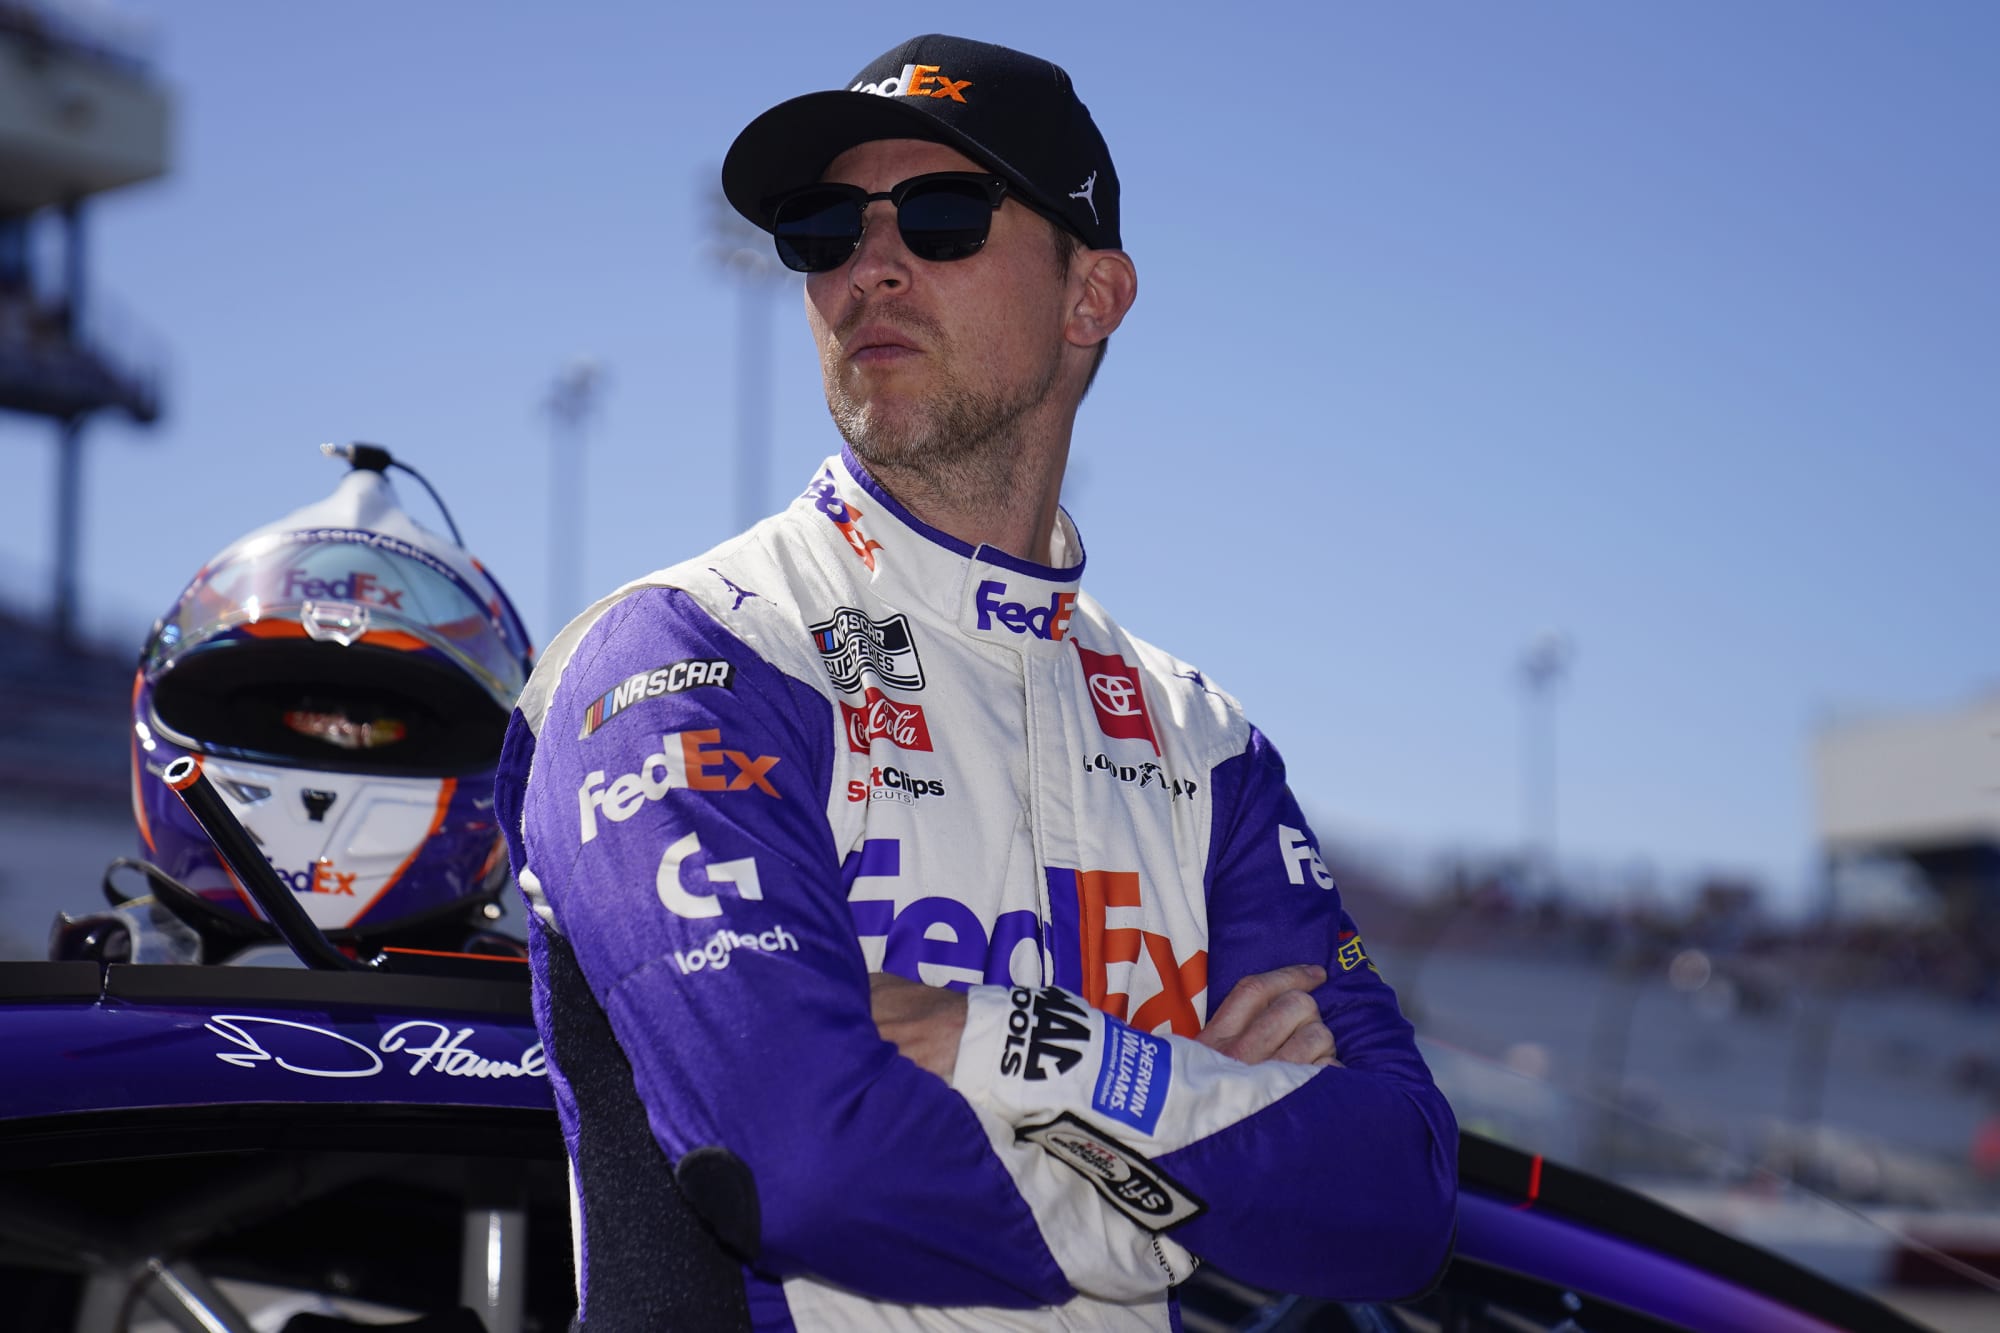 NASCAR: Denny Hamlin inches closer to unwanted record - Beyond the Flag